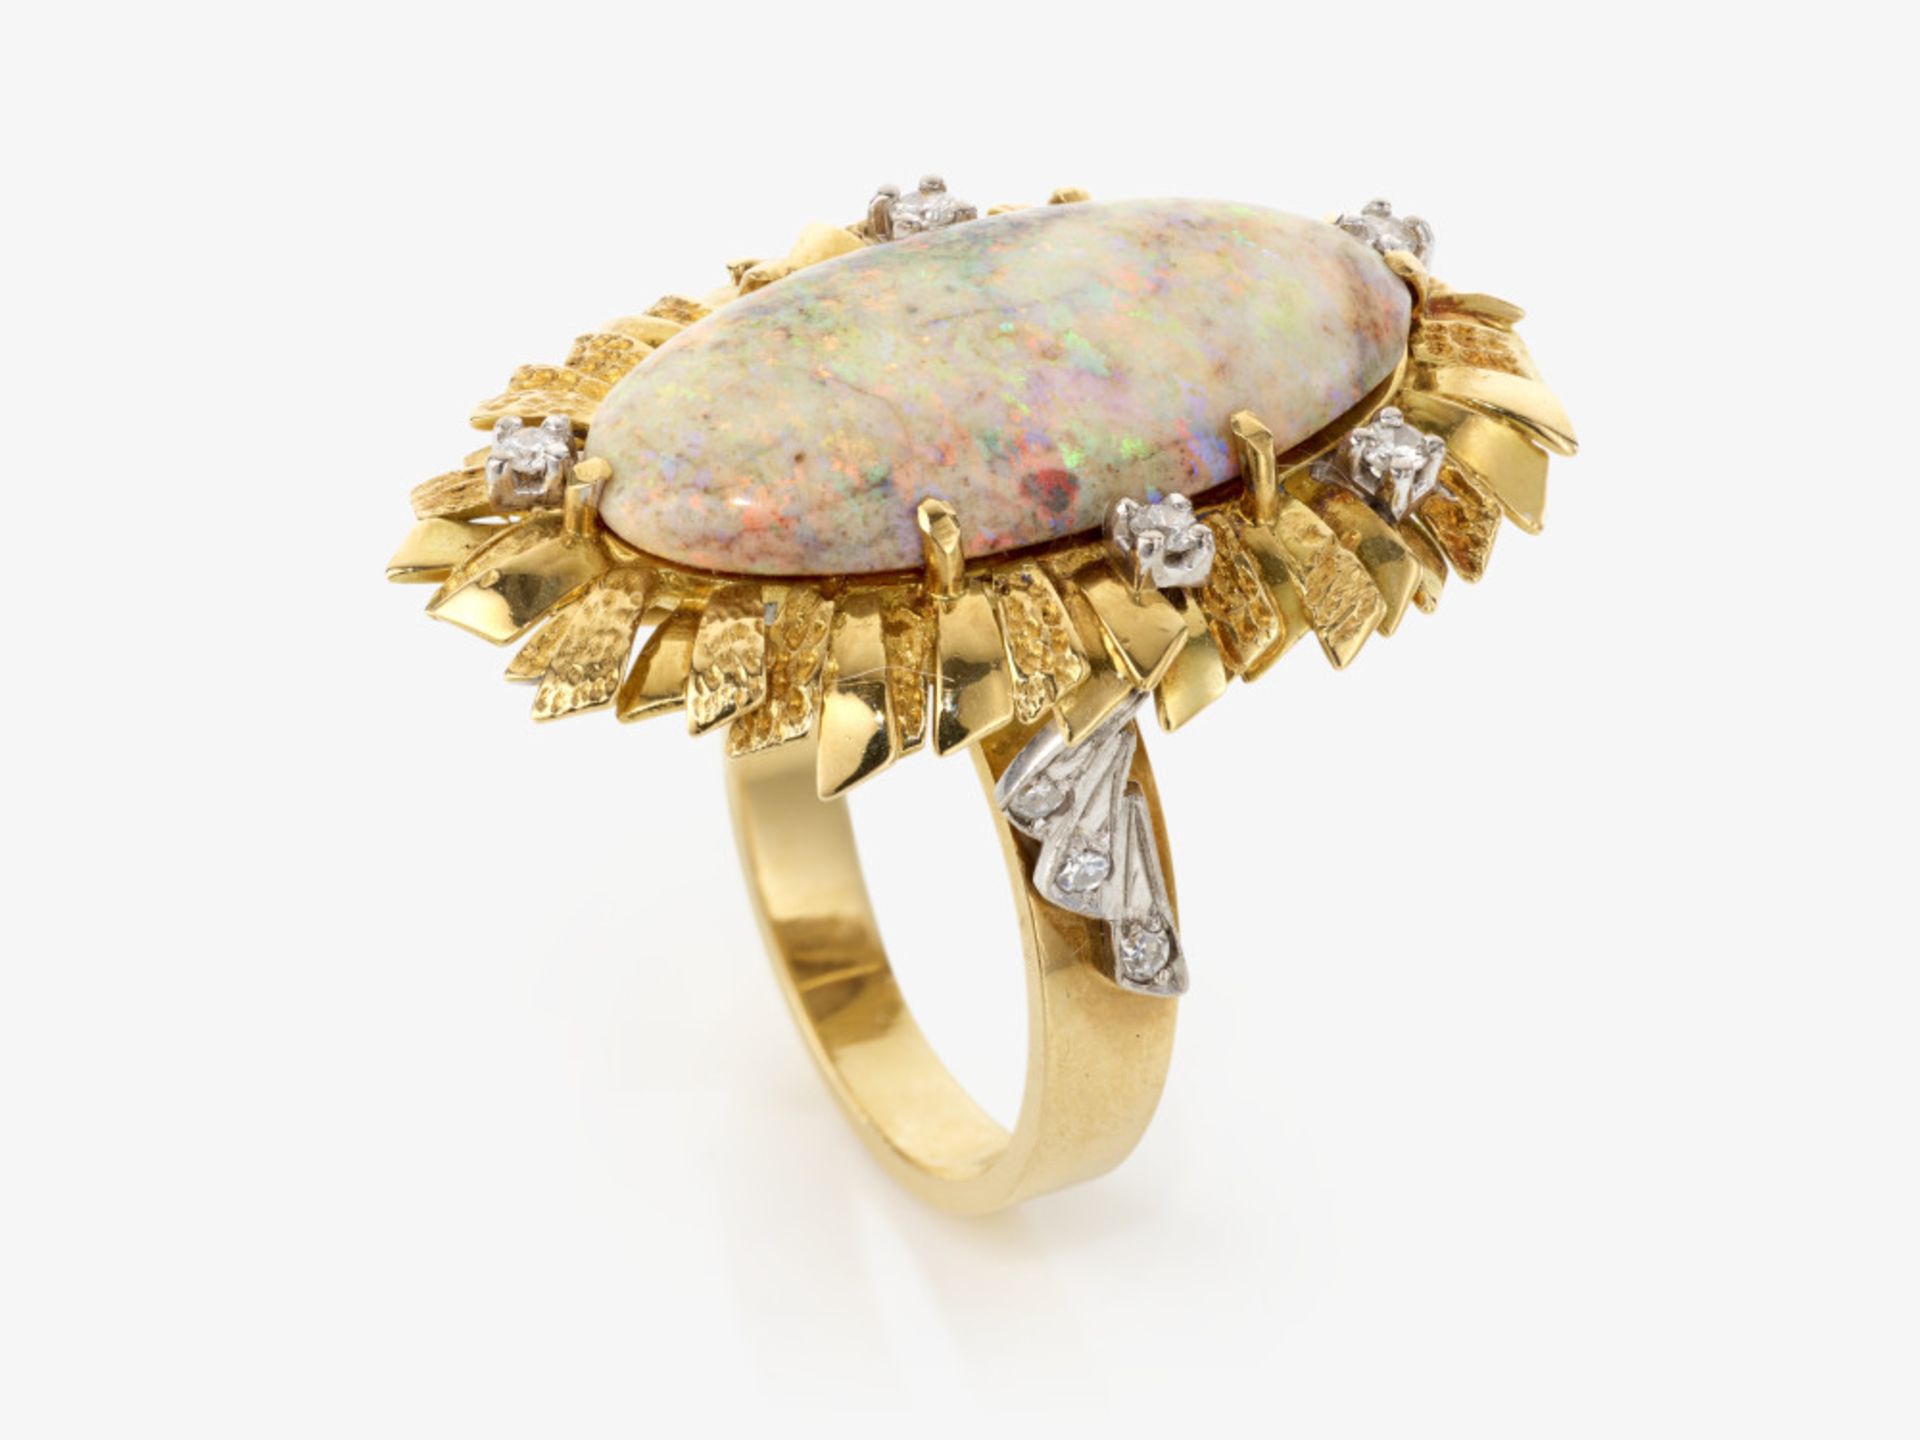 A ring with crystal opal